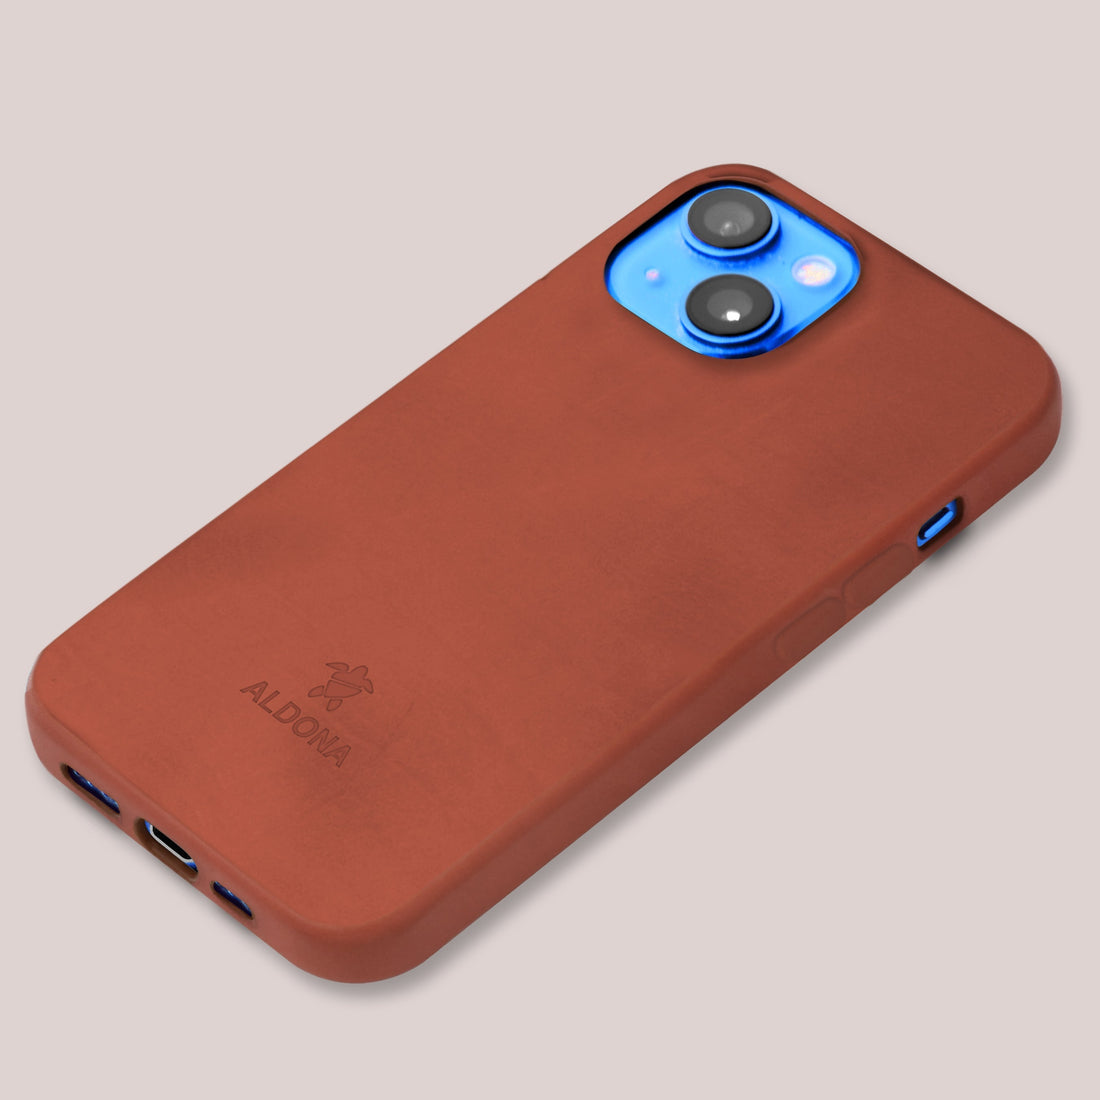 Kalon Case for iPhone with MagSafe Compatibility